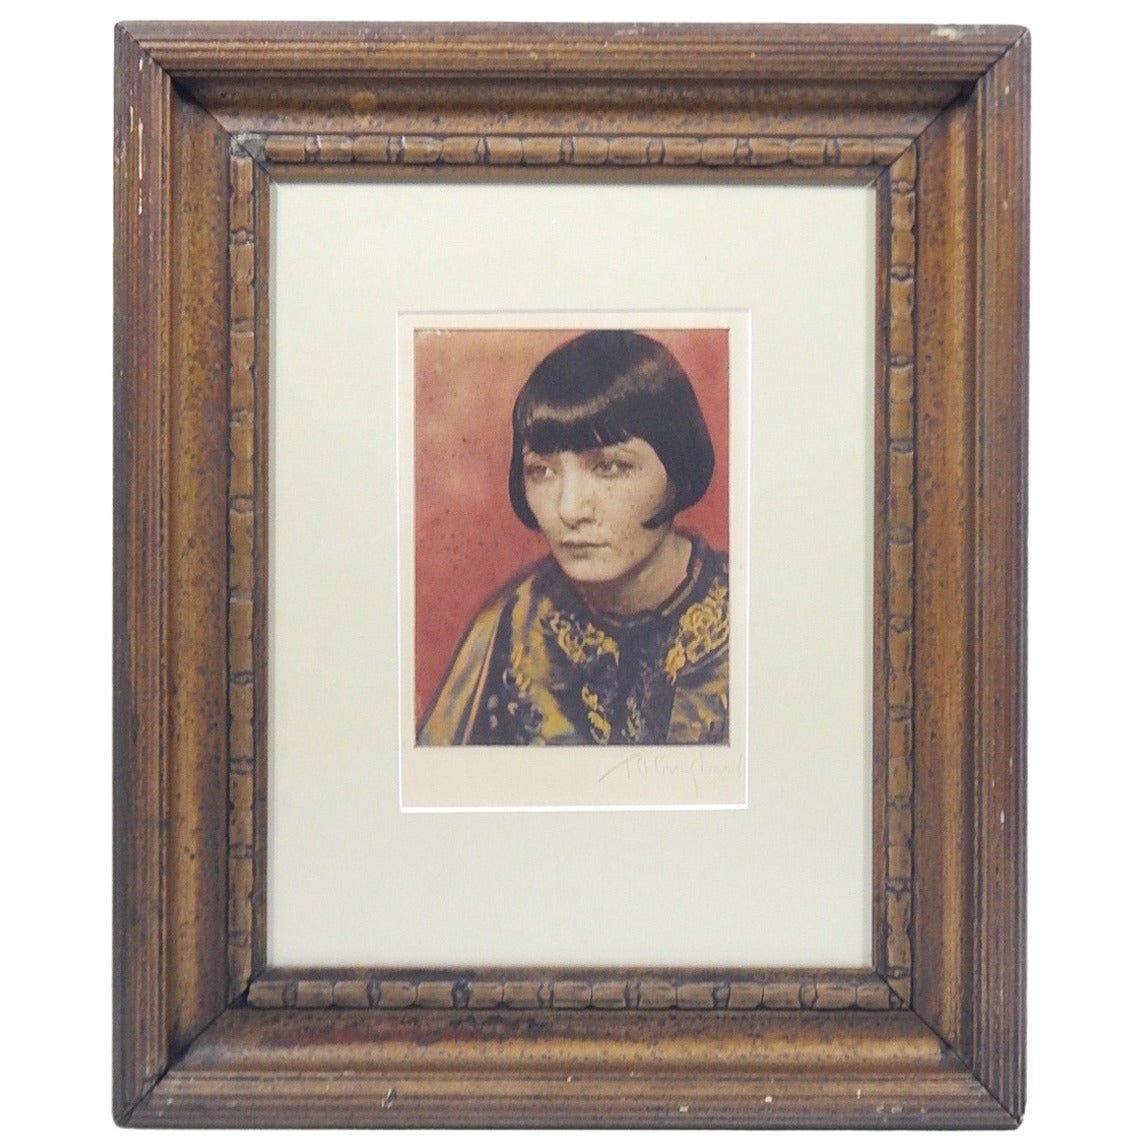 "Marte-Marie" Early 1900s Gum Bichromate Print by T. O'Conor Sloane Jr.